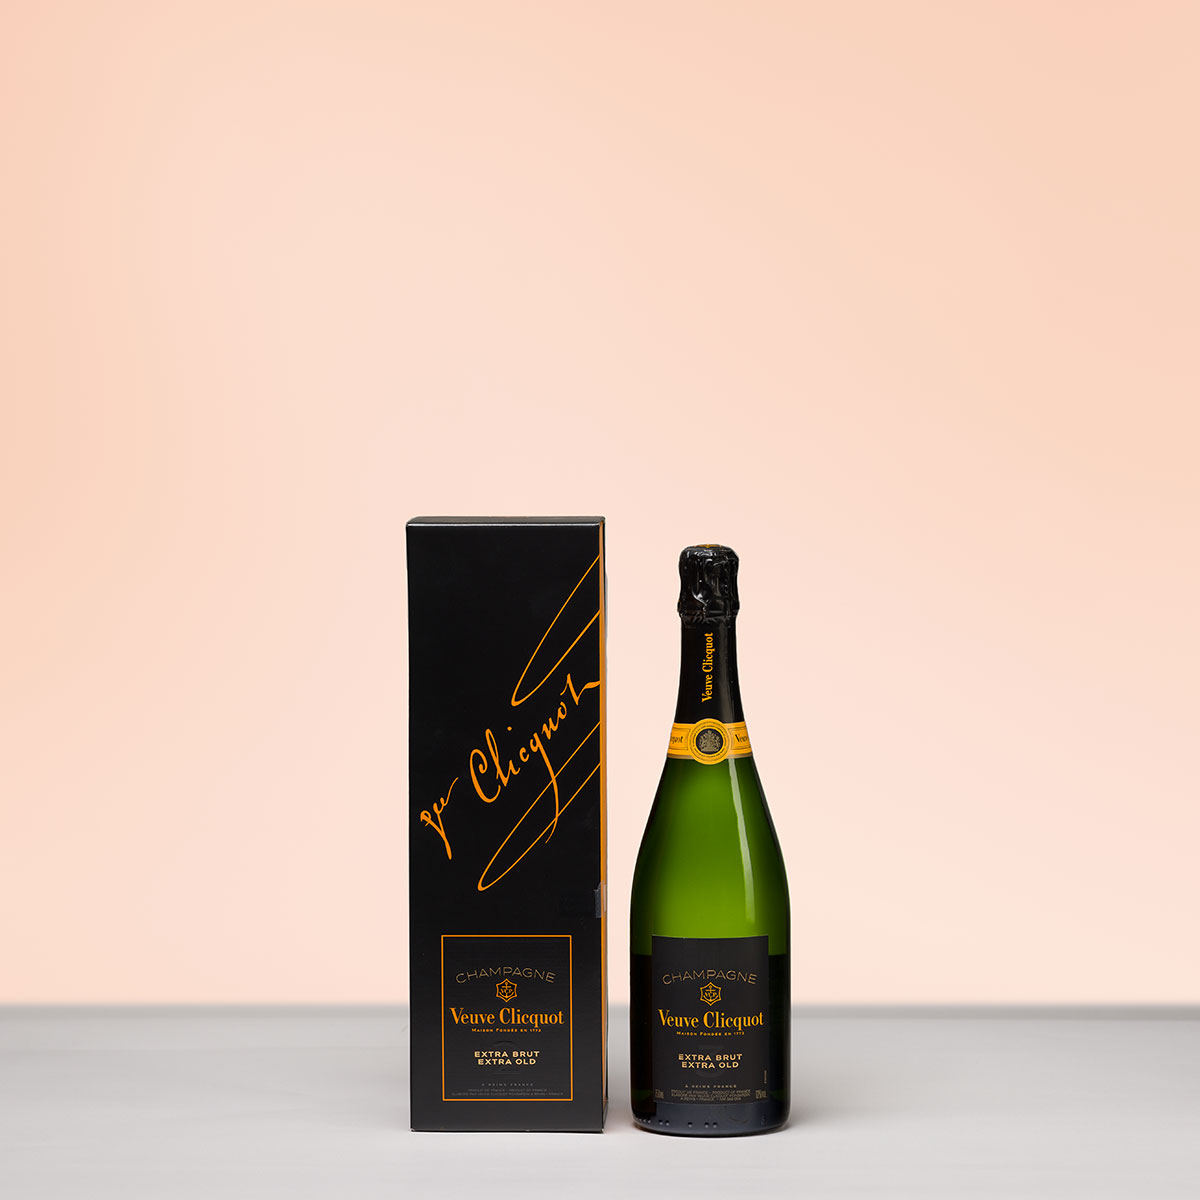 https://www.giftsforeurope.com/images/gene/prod/zoom/gfe2001195_01_veuve-clicquot-extra-brut-extra-old-75-cl.jpg